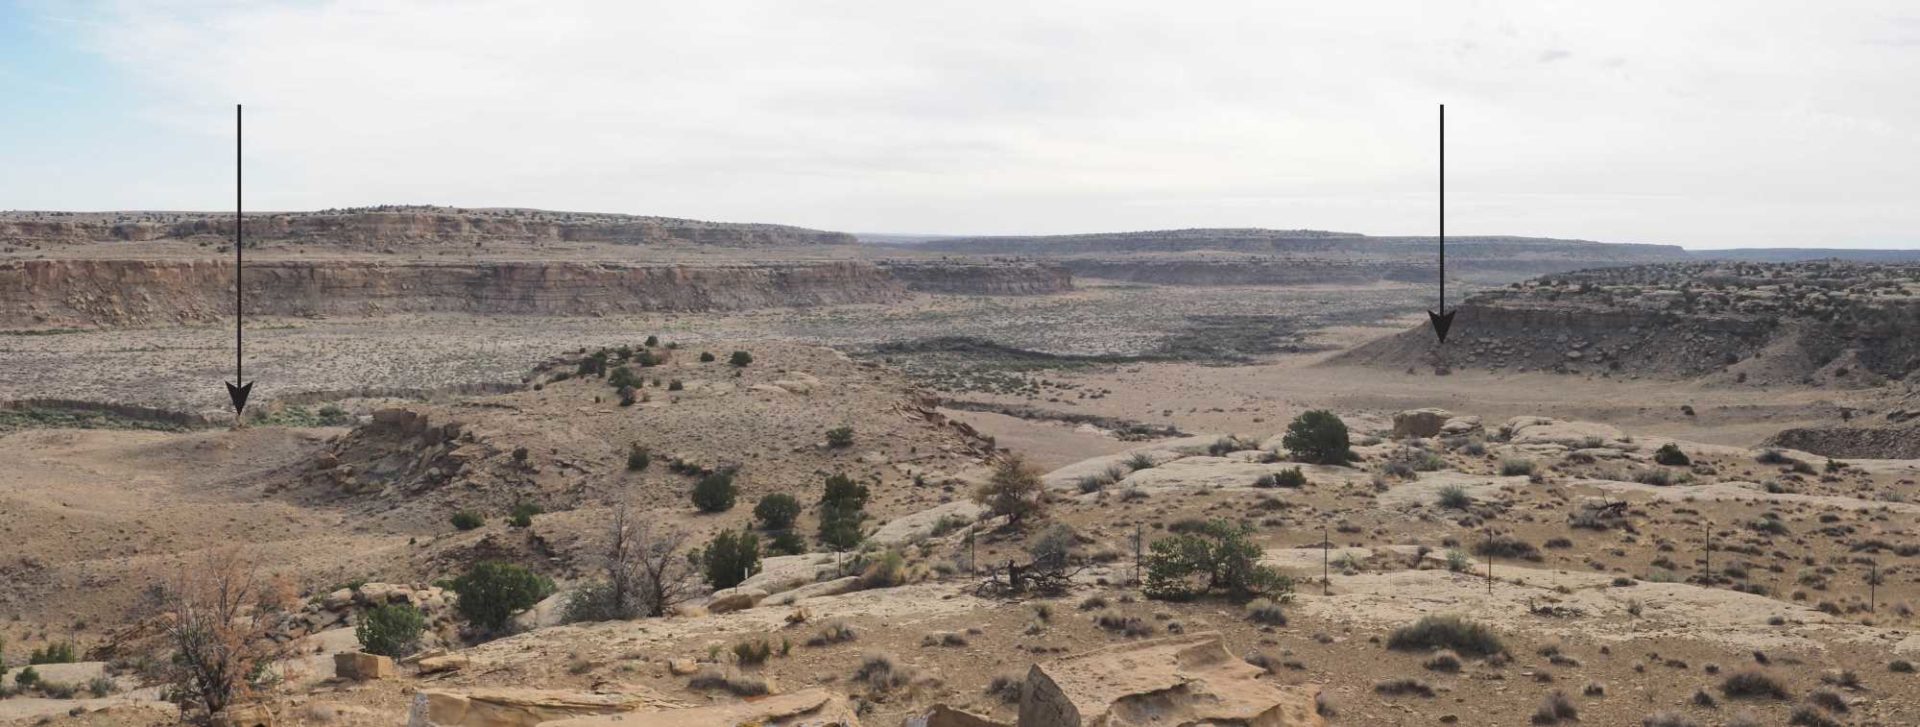 View from the Chacra Fortress pueblito (LA 52606) showing two additional pueblitos, one hilltop and one bouldertop, located less than 1 kilometer away on Navajo Nation land (indicated by arrows). Image: Wade Campbell